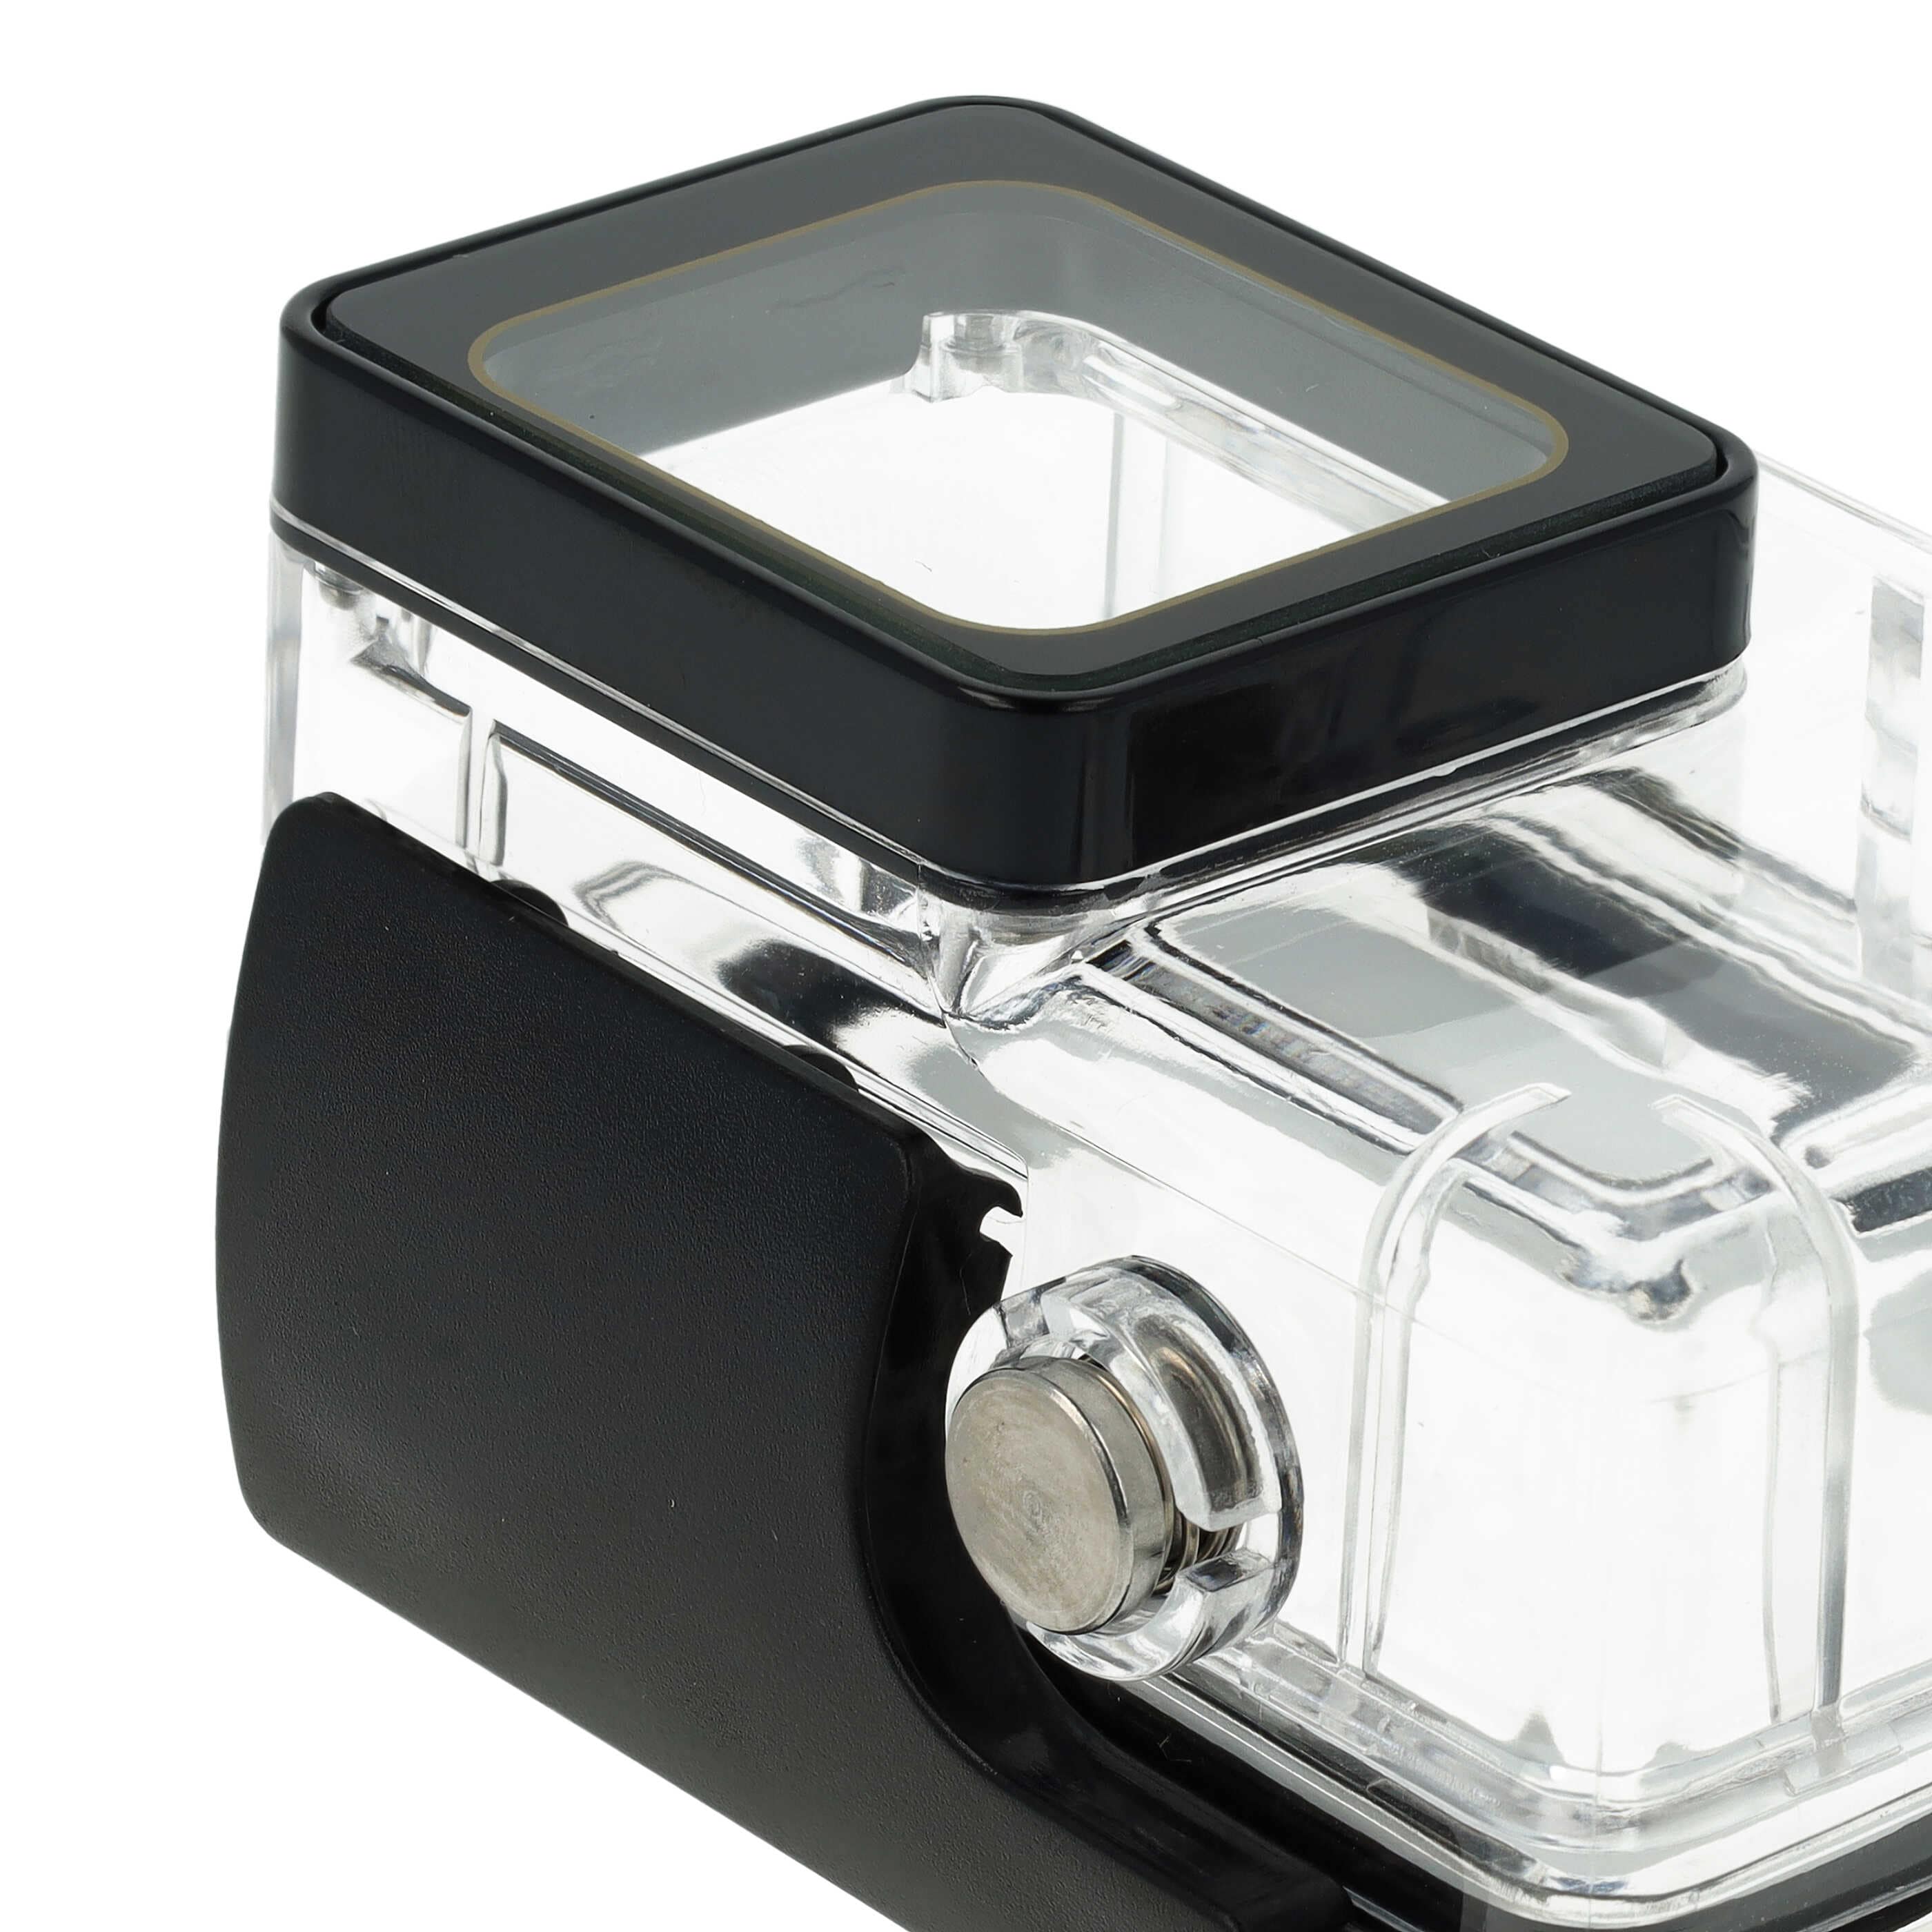 Underwater Housing suitable for GoPro Hero 5, 6, 7 Action Camera - Up to a max. Depth of 40 m